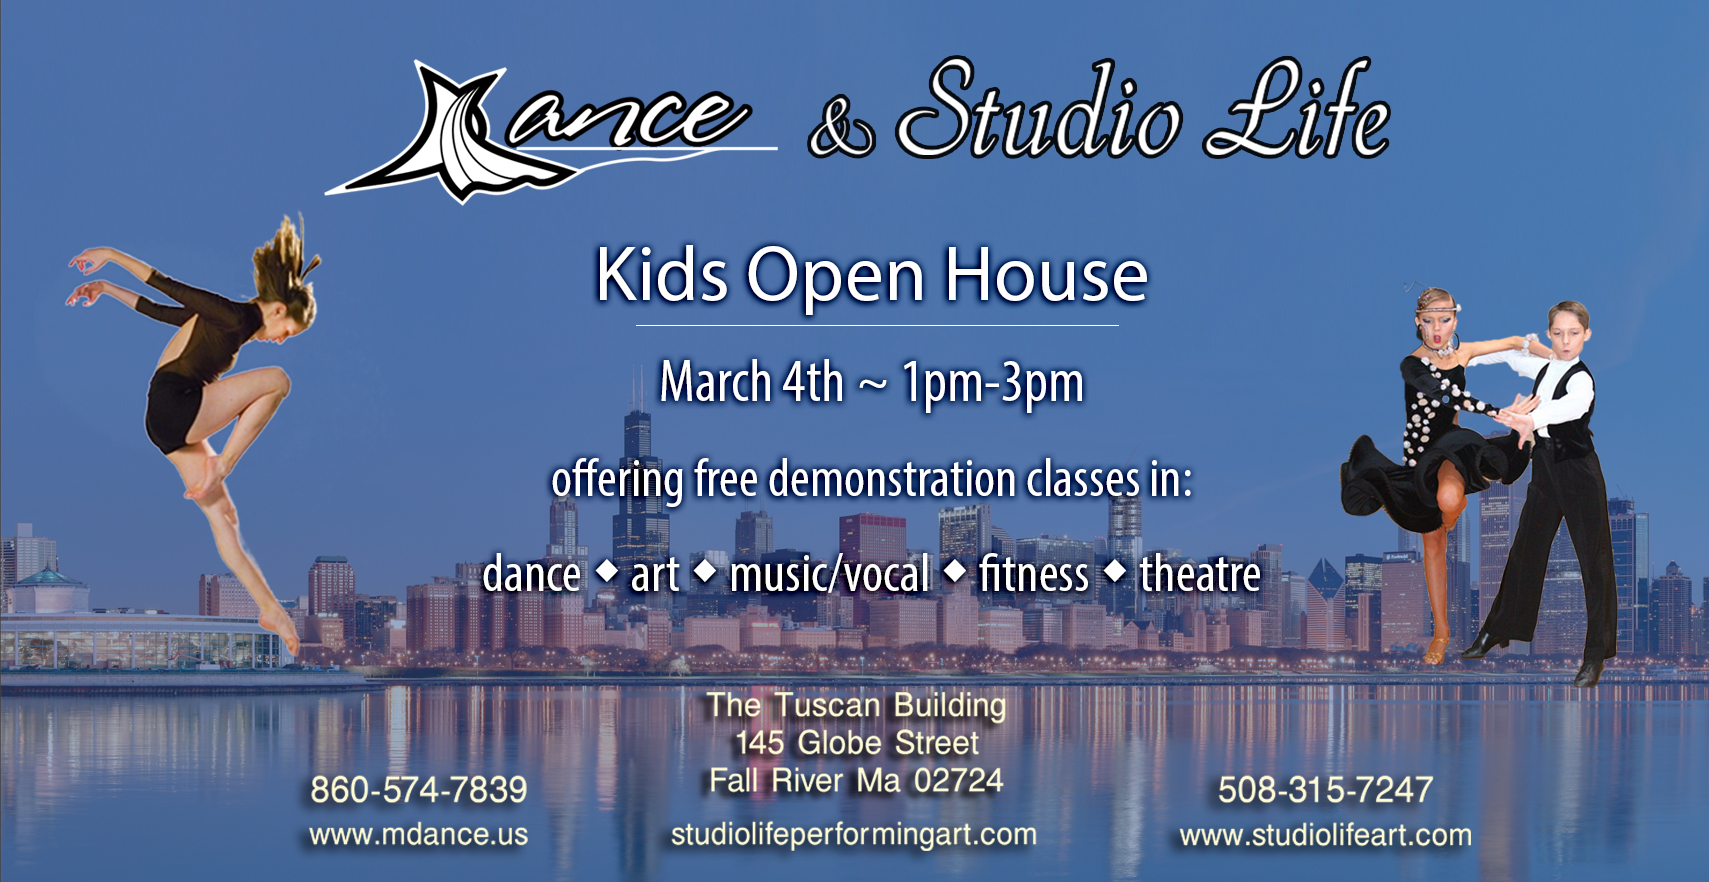 M Dance Studio events March 4th Kids Open House